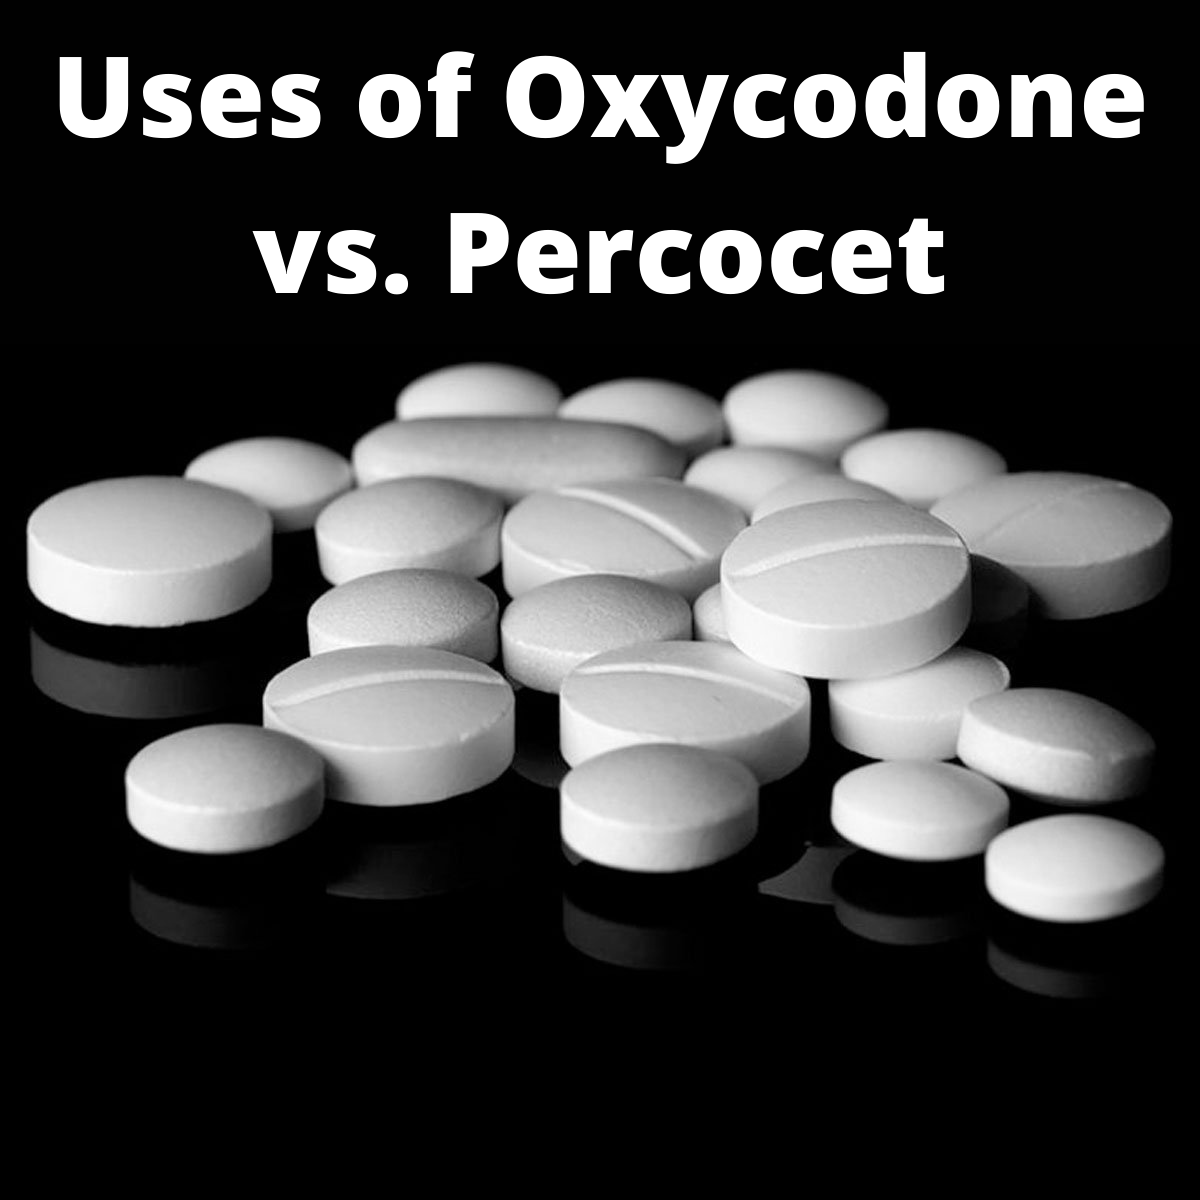 Uses of Oxycodone vs. Percocet